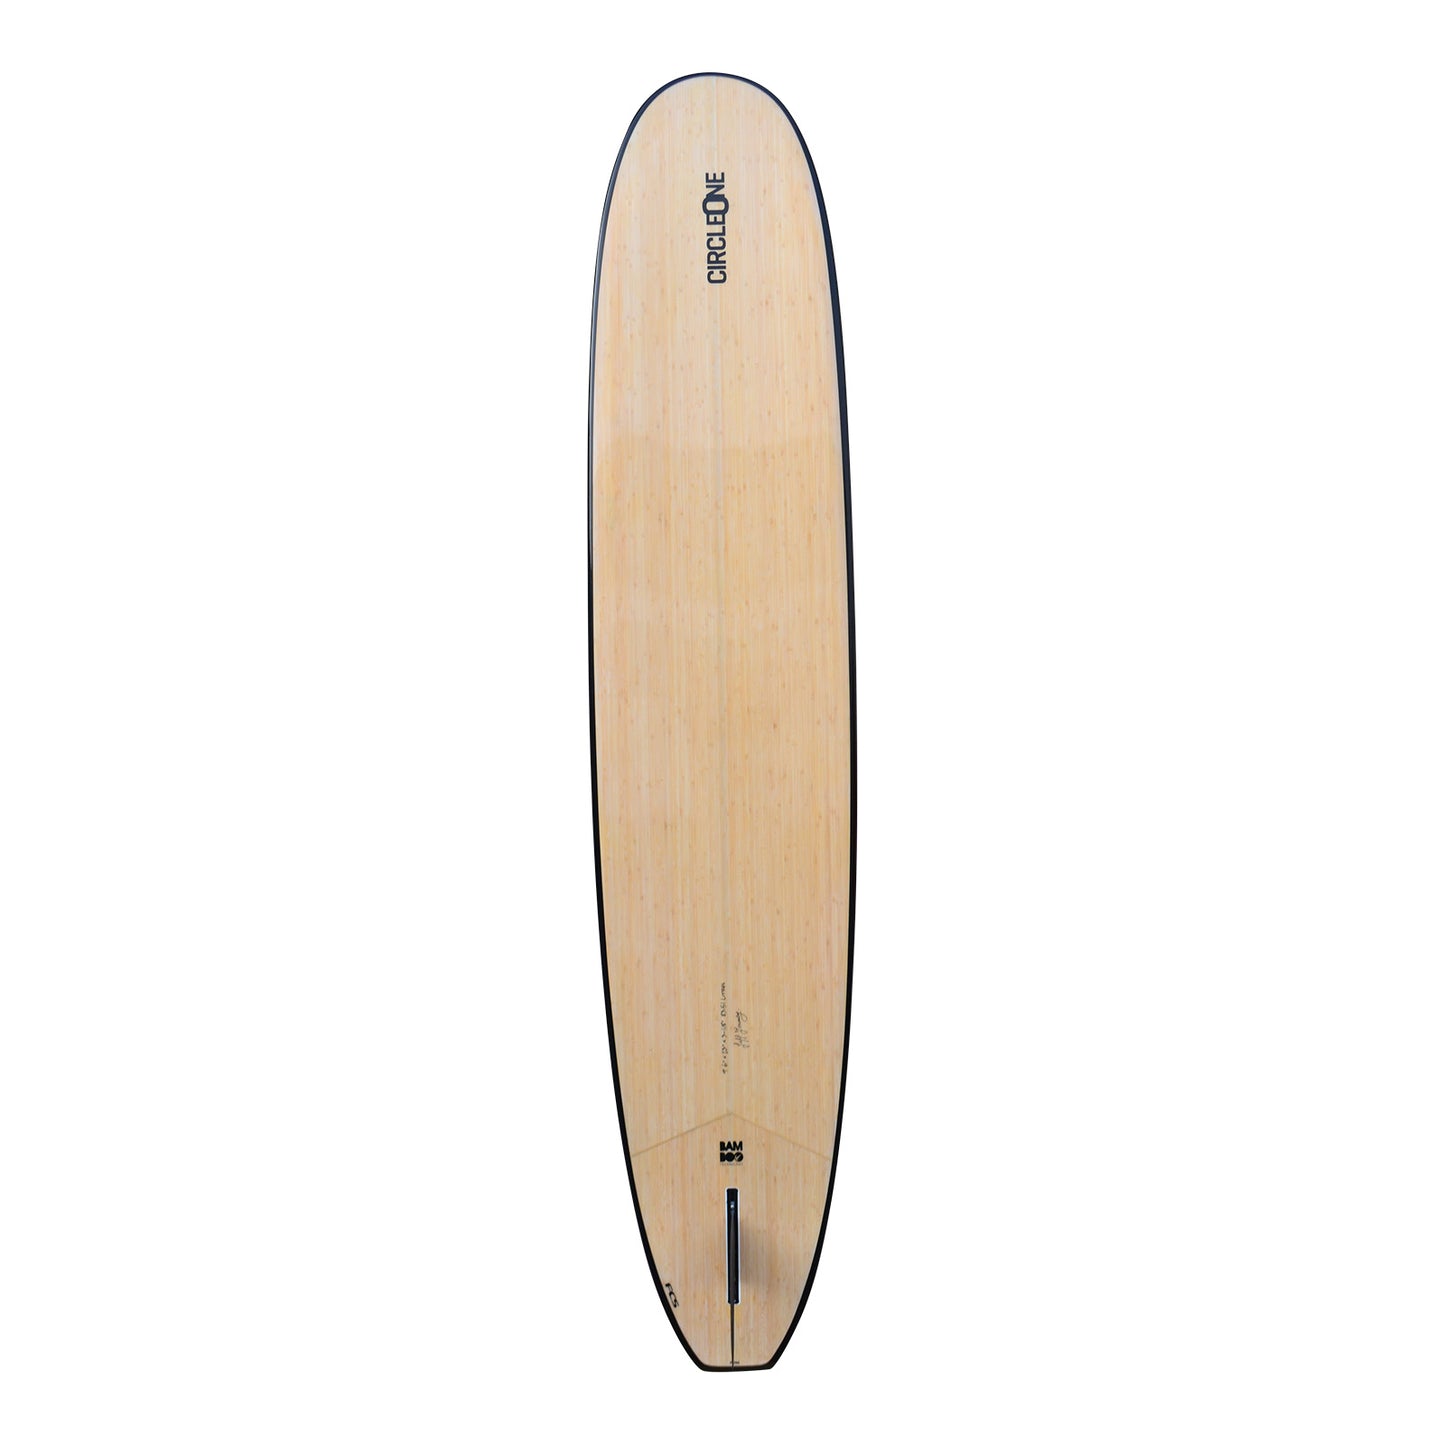 9′ 6″ Bamboo Noserider Longboard Package – Includes Bag, Leash, Fins & Wax